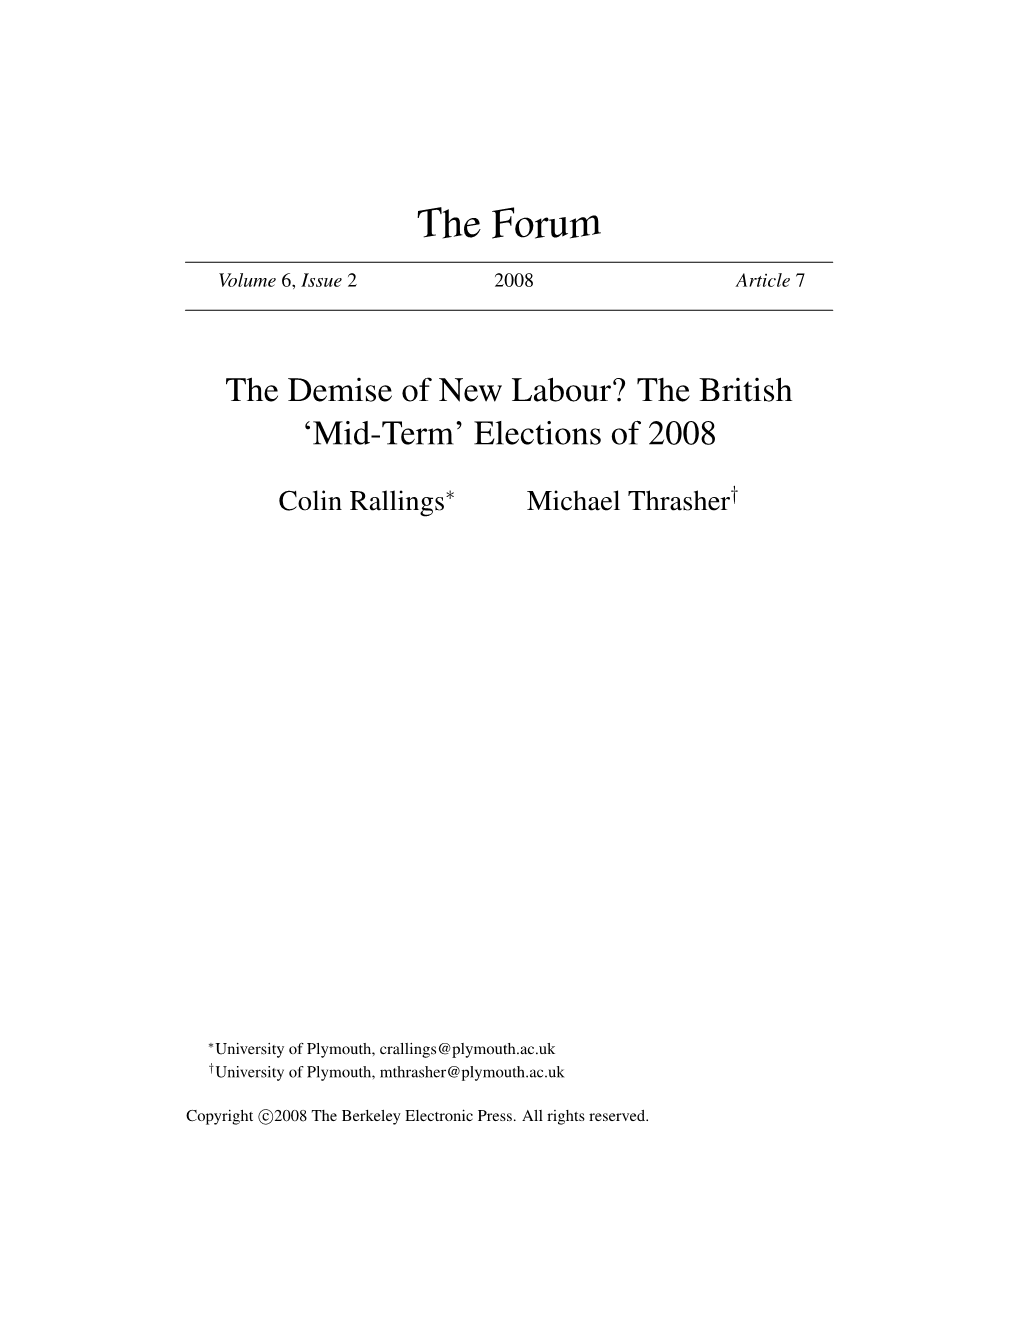 The Demise of New Labour? the British ‘Mid-Term’ Elections of 2008